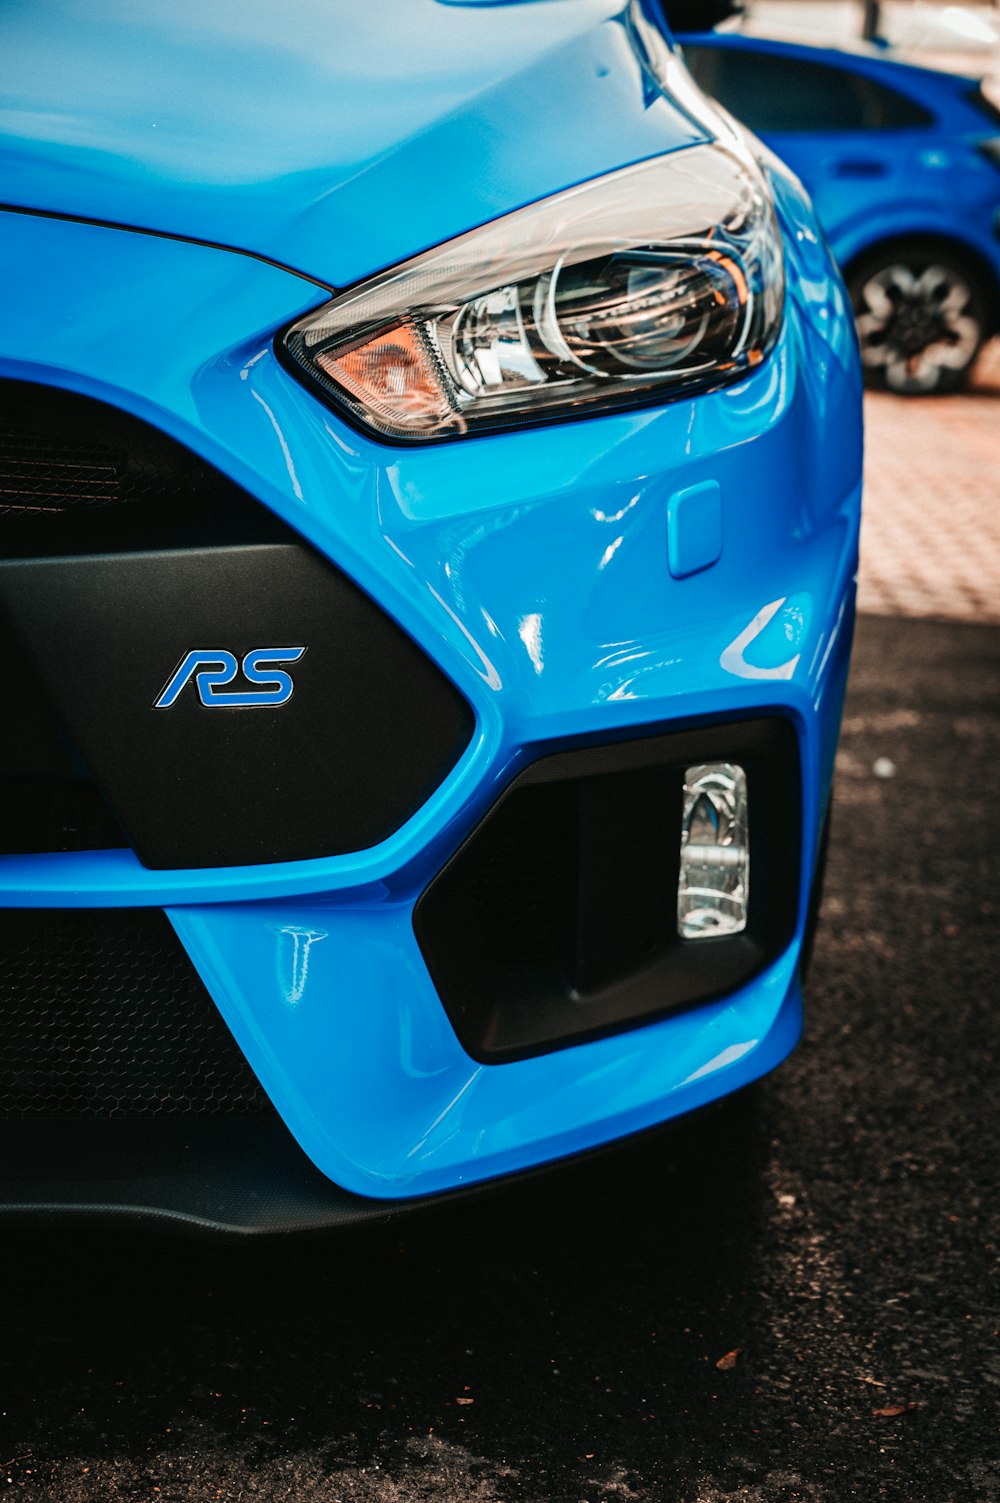 Ford Focus Rs Pictures | Download Free Images on Unsplash